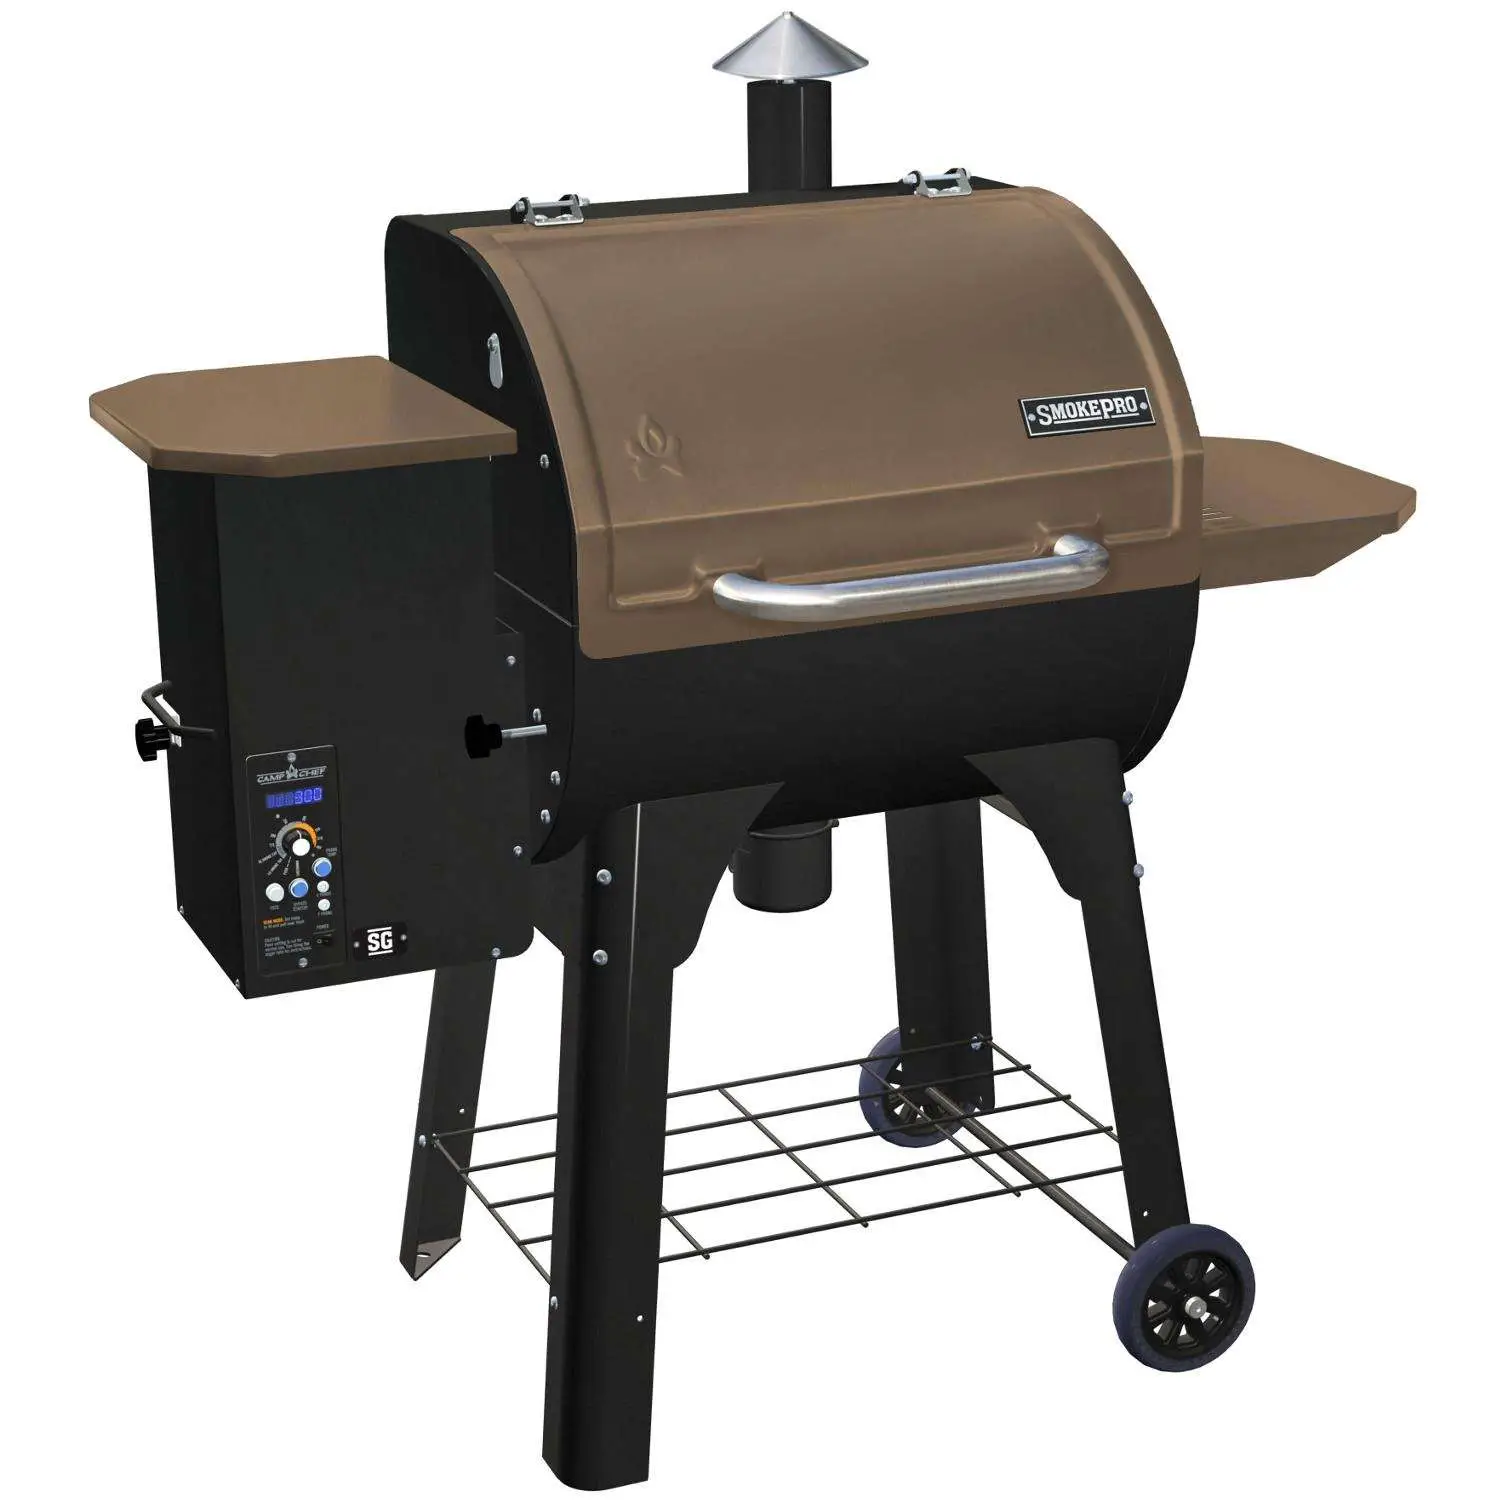 Camp Chef SmokePro SG Wood Pellet Grill